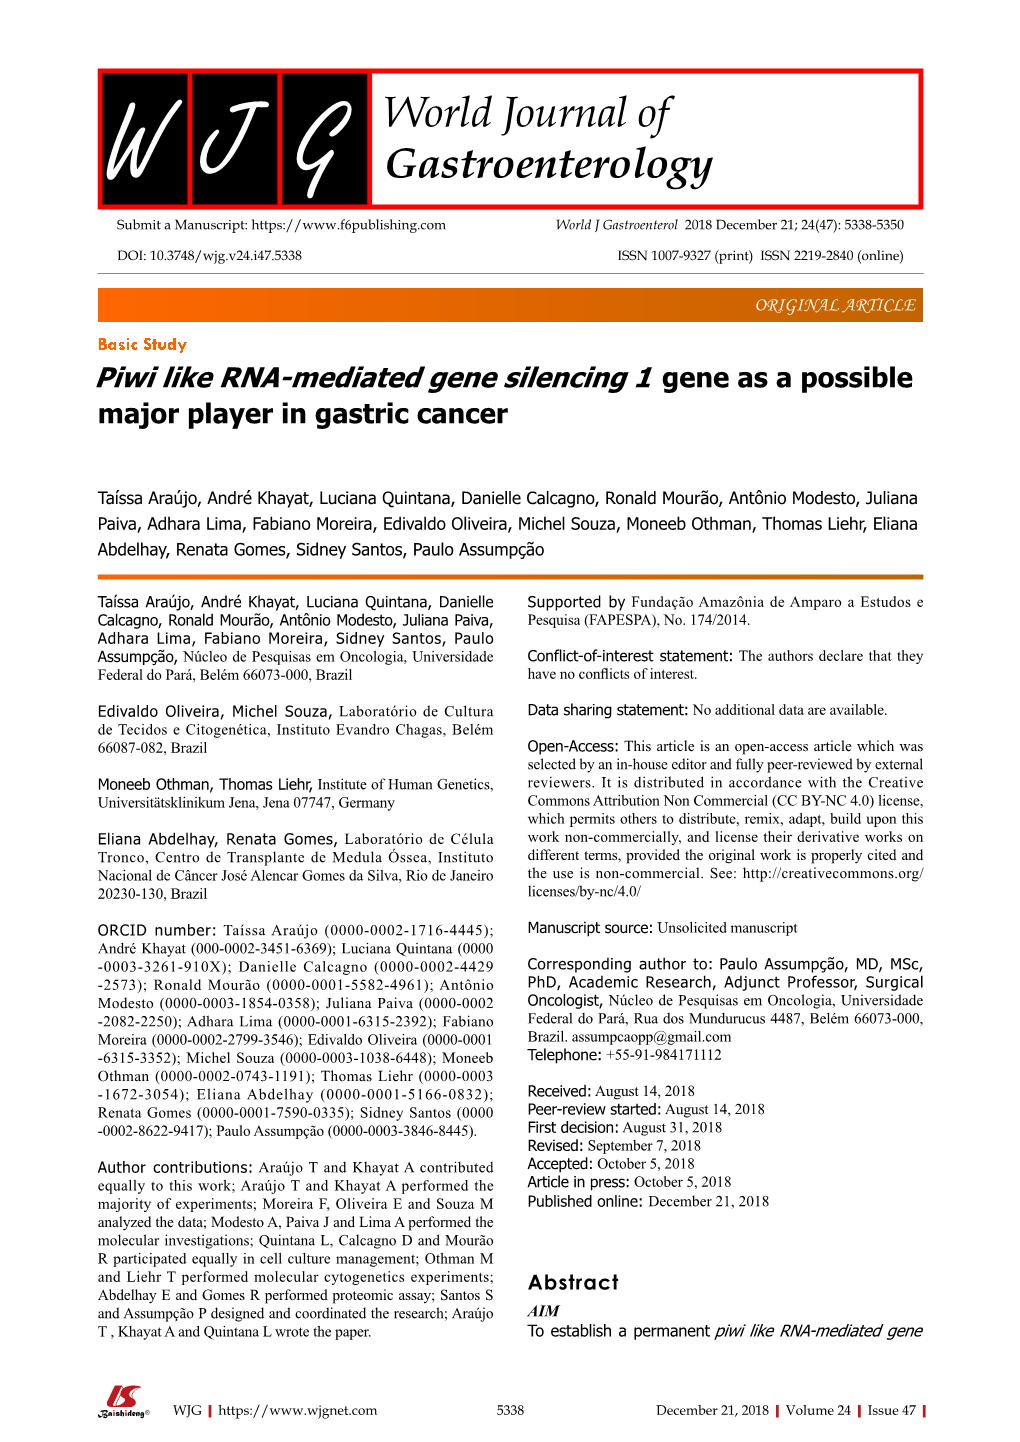 Piwi Like RNA-Mediated Gene Silencing 1 Gene As a Possible Major Player in Gastric Cancer